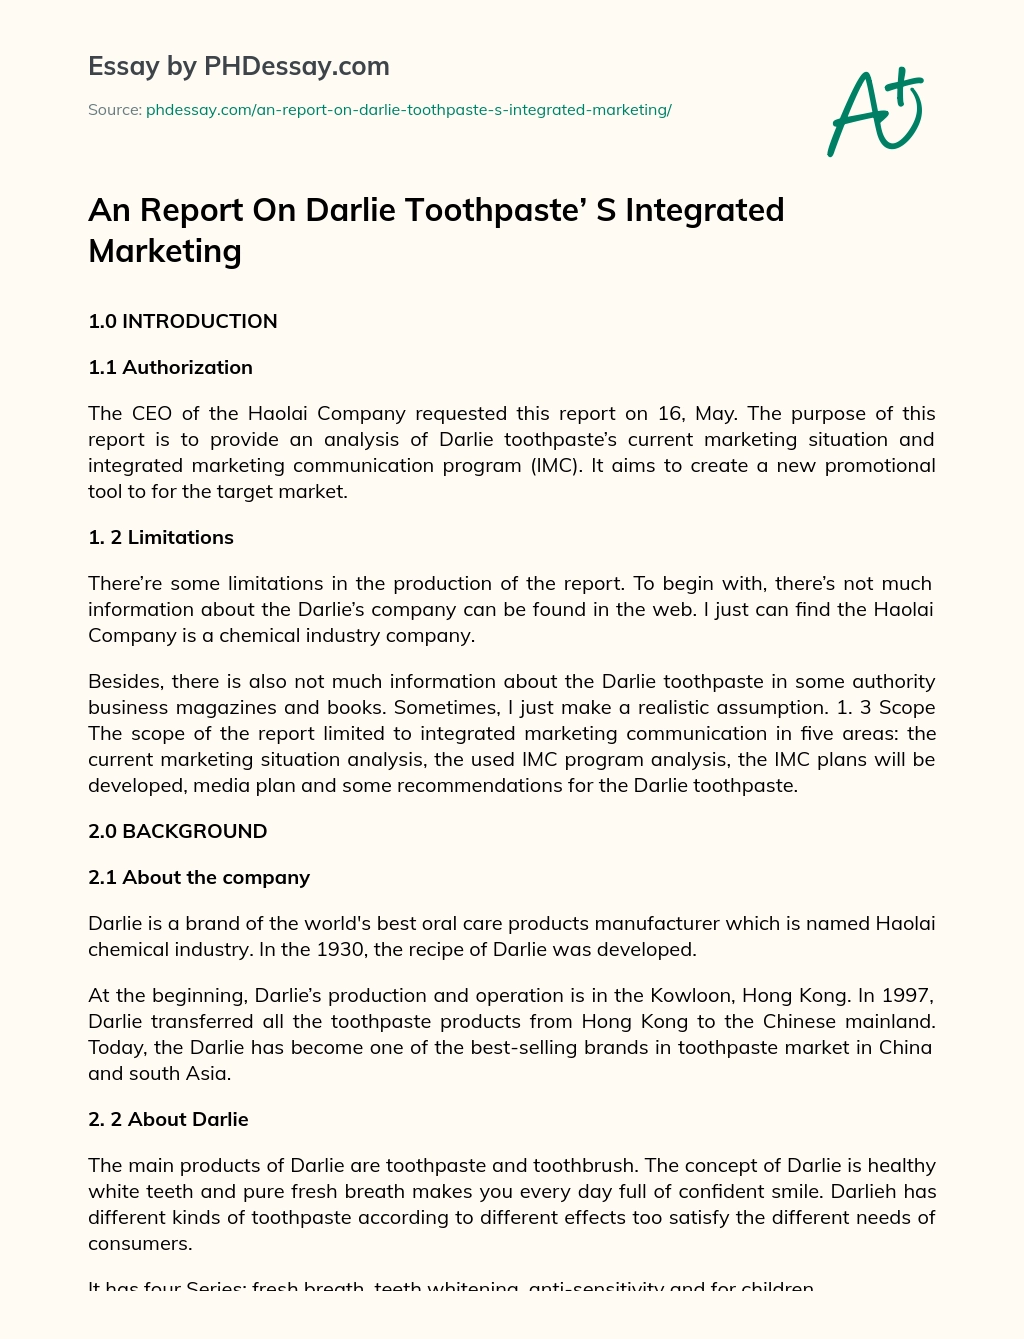 An Report On Darlie Toothpaste’ S Integrated Marketing essay